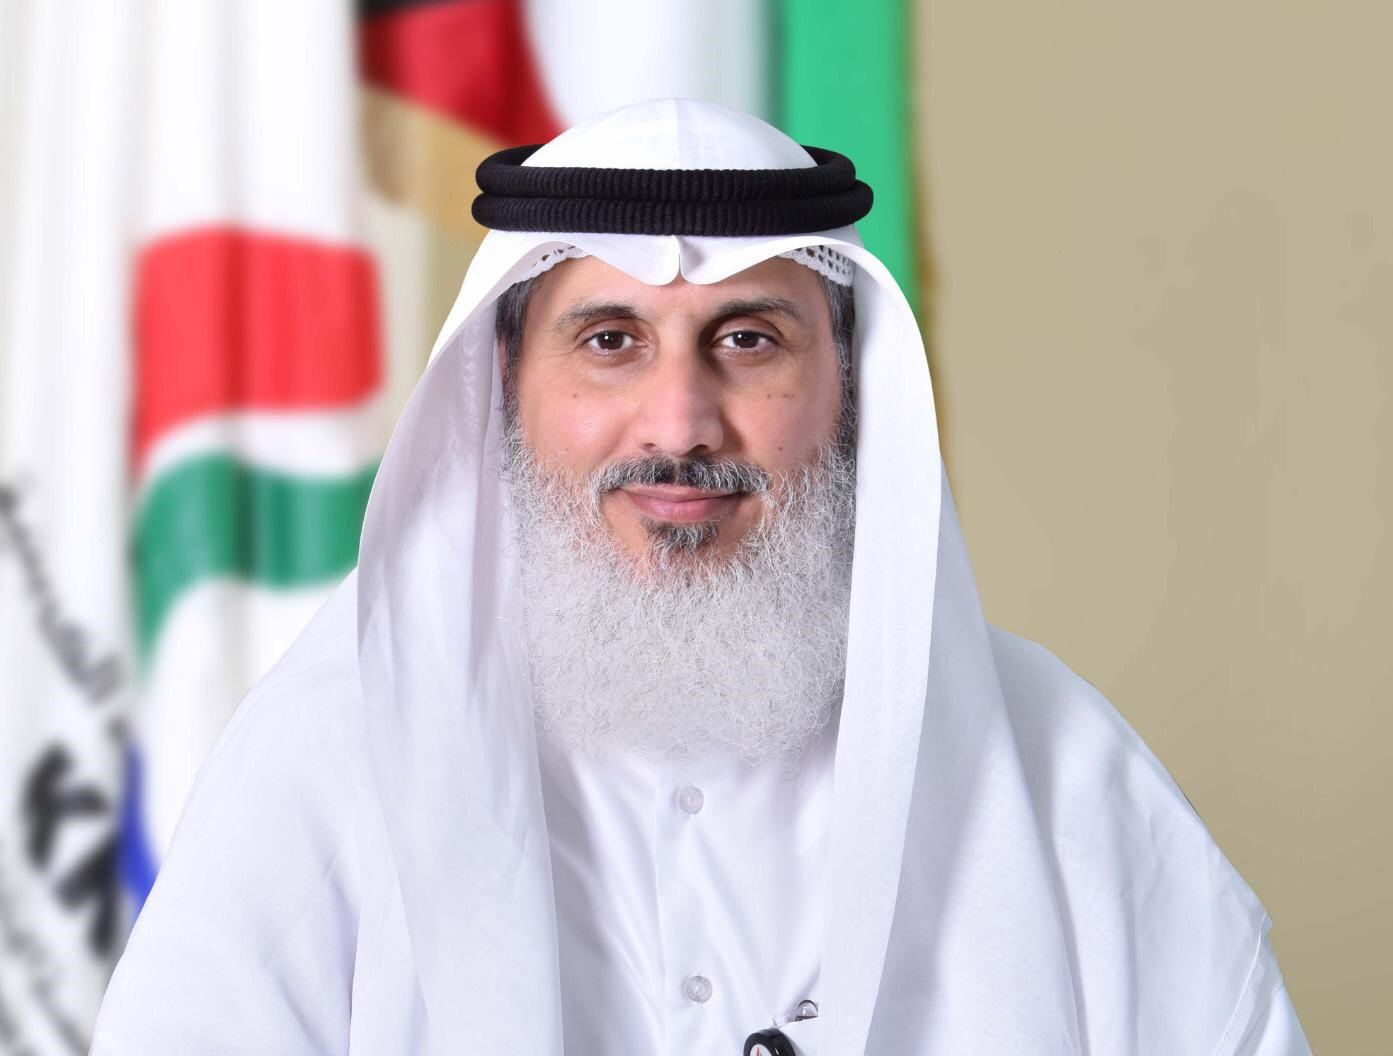 (KNPC) Chief Executive Officer (CEO) Waleed Al-Bader